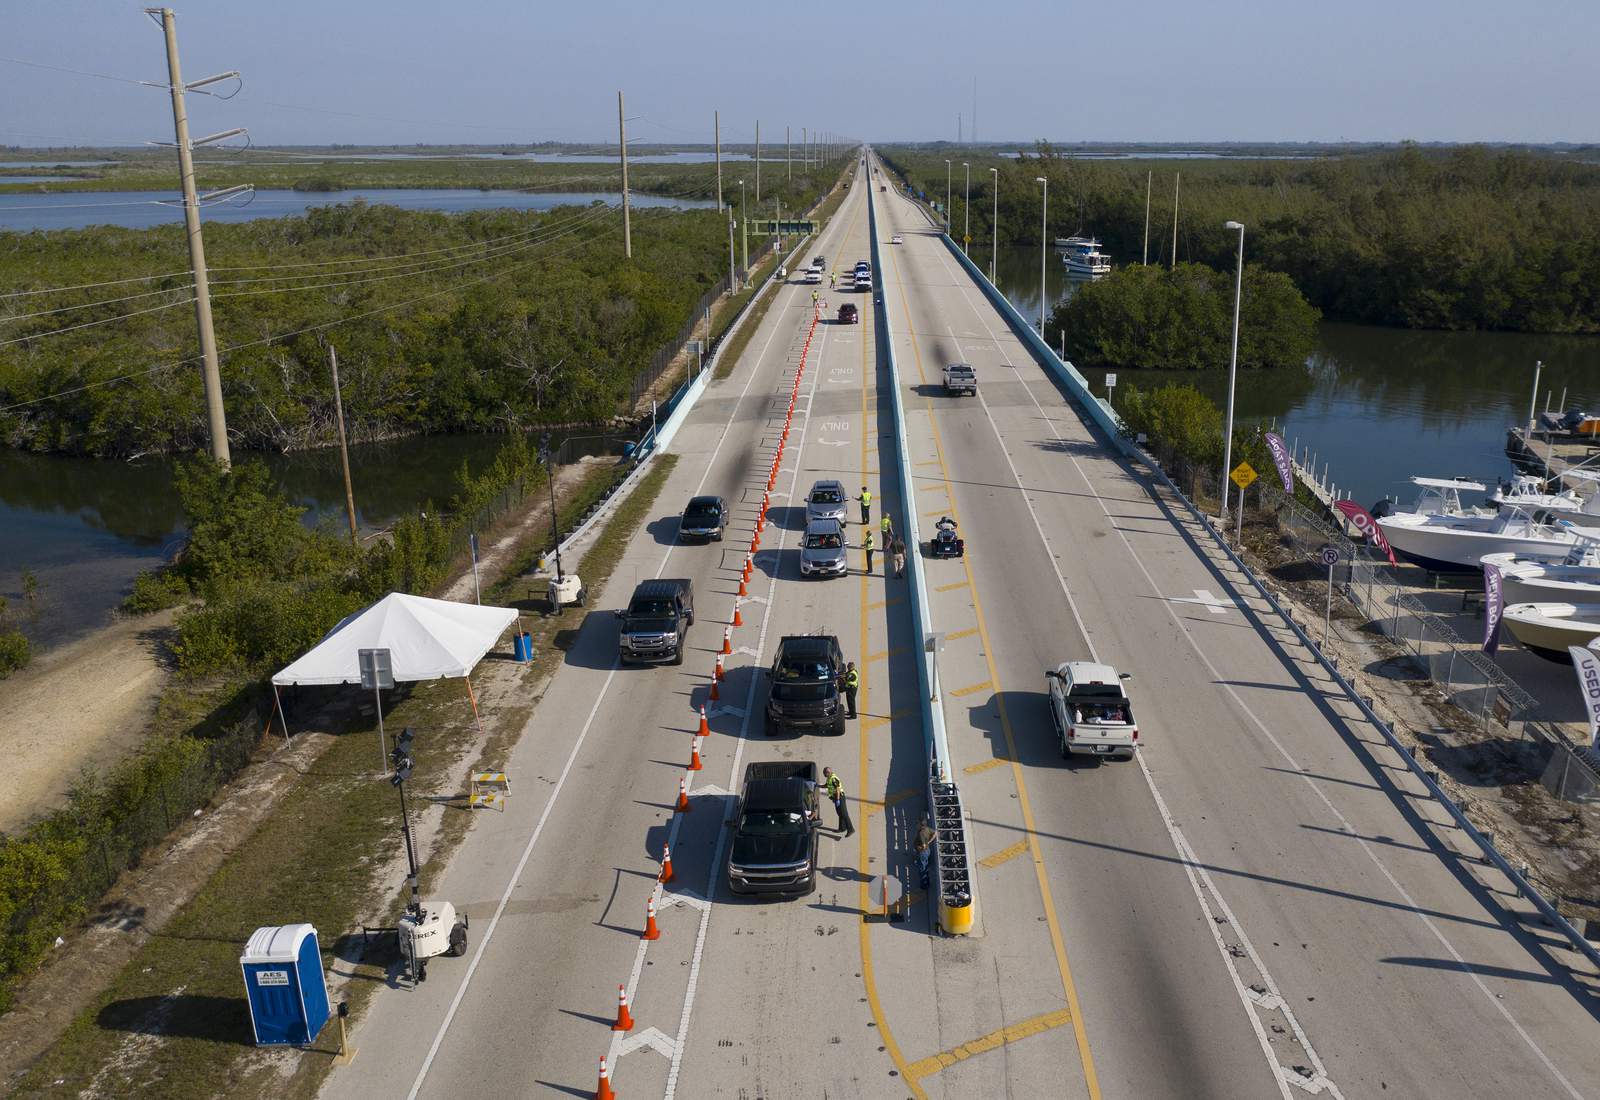 No more checkpoints; Florida Keys open for visitors